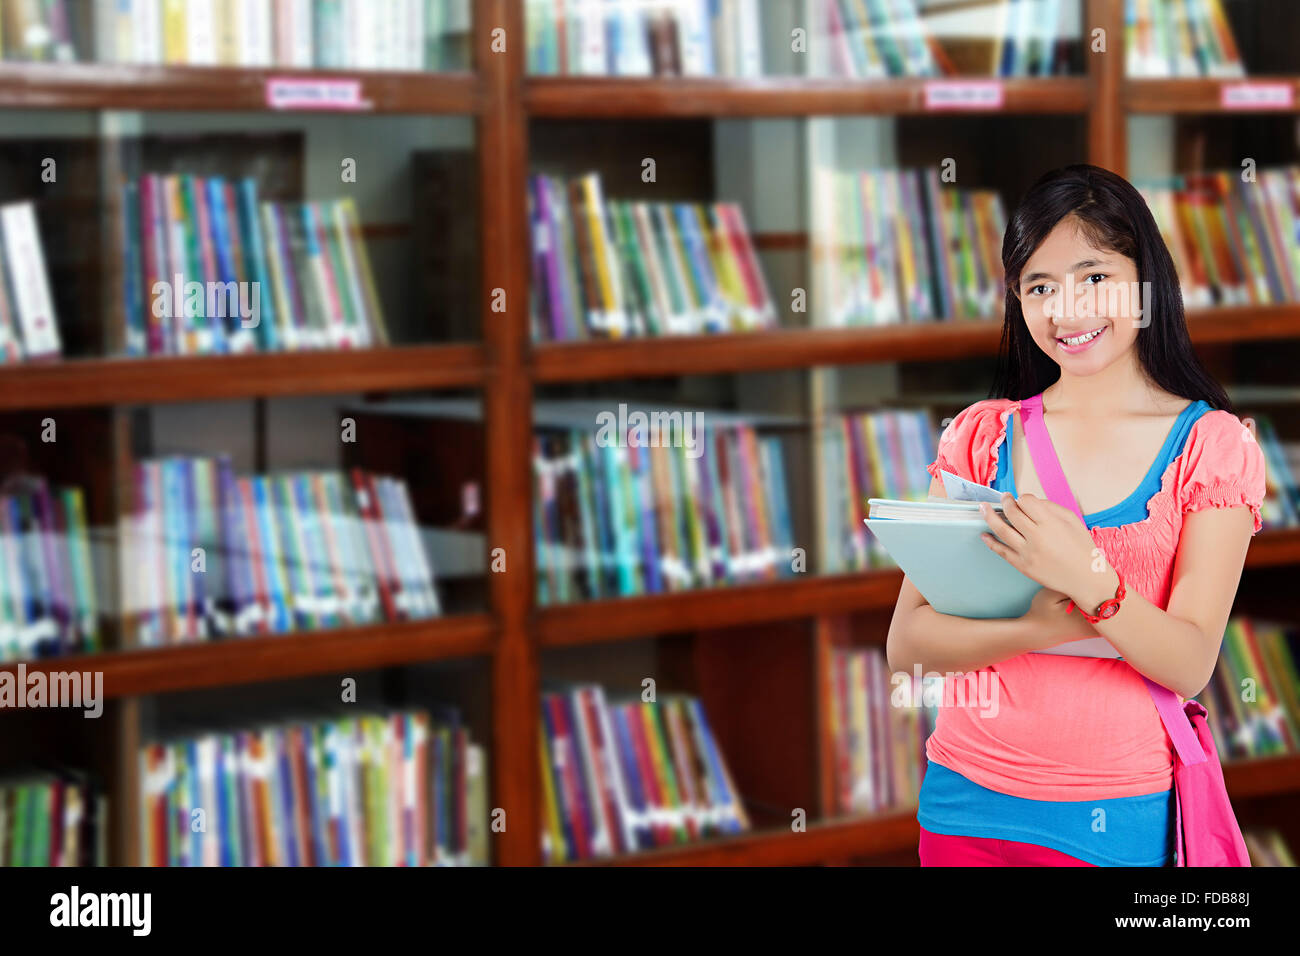 1 Teenager Girl College Student Standing Library Holding Book Stock Photo